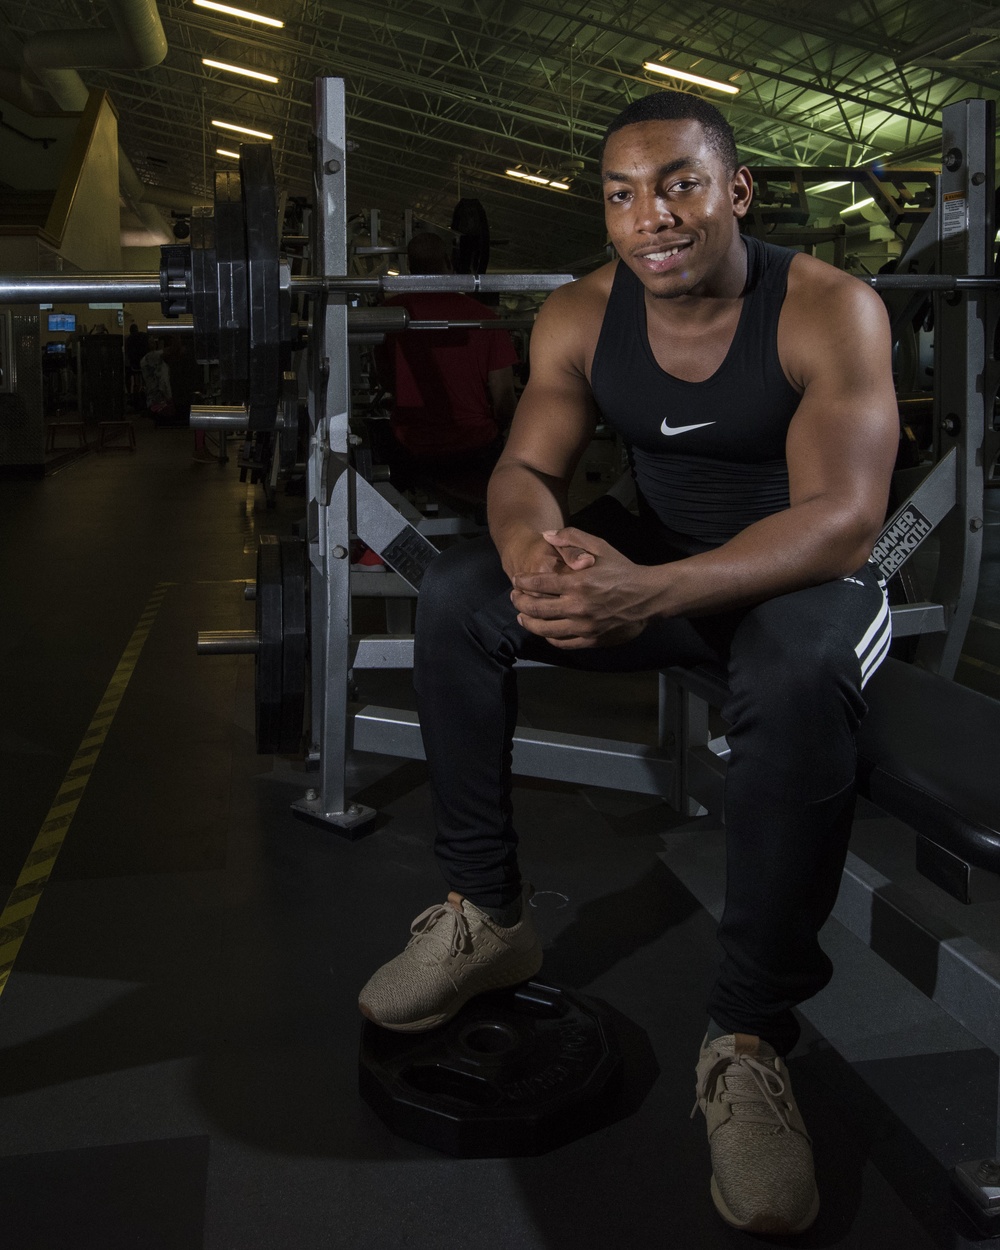 Working to inspire others: An Airman’s dedication to self-improvement